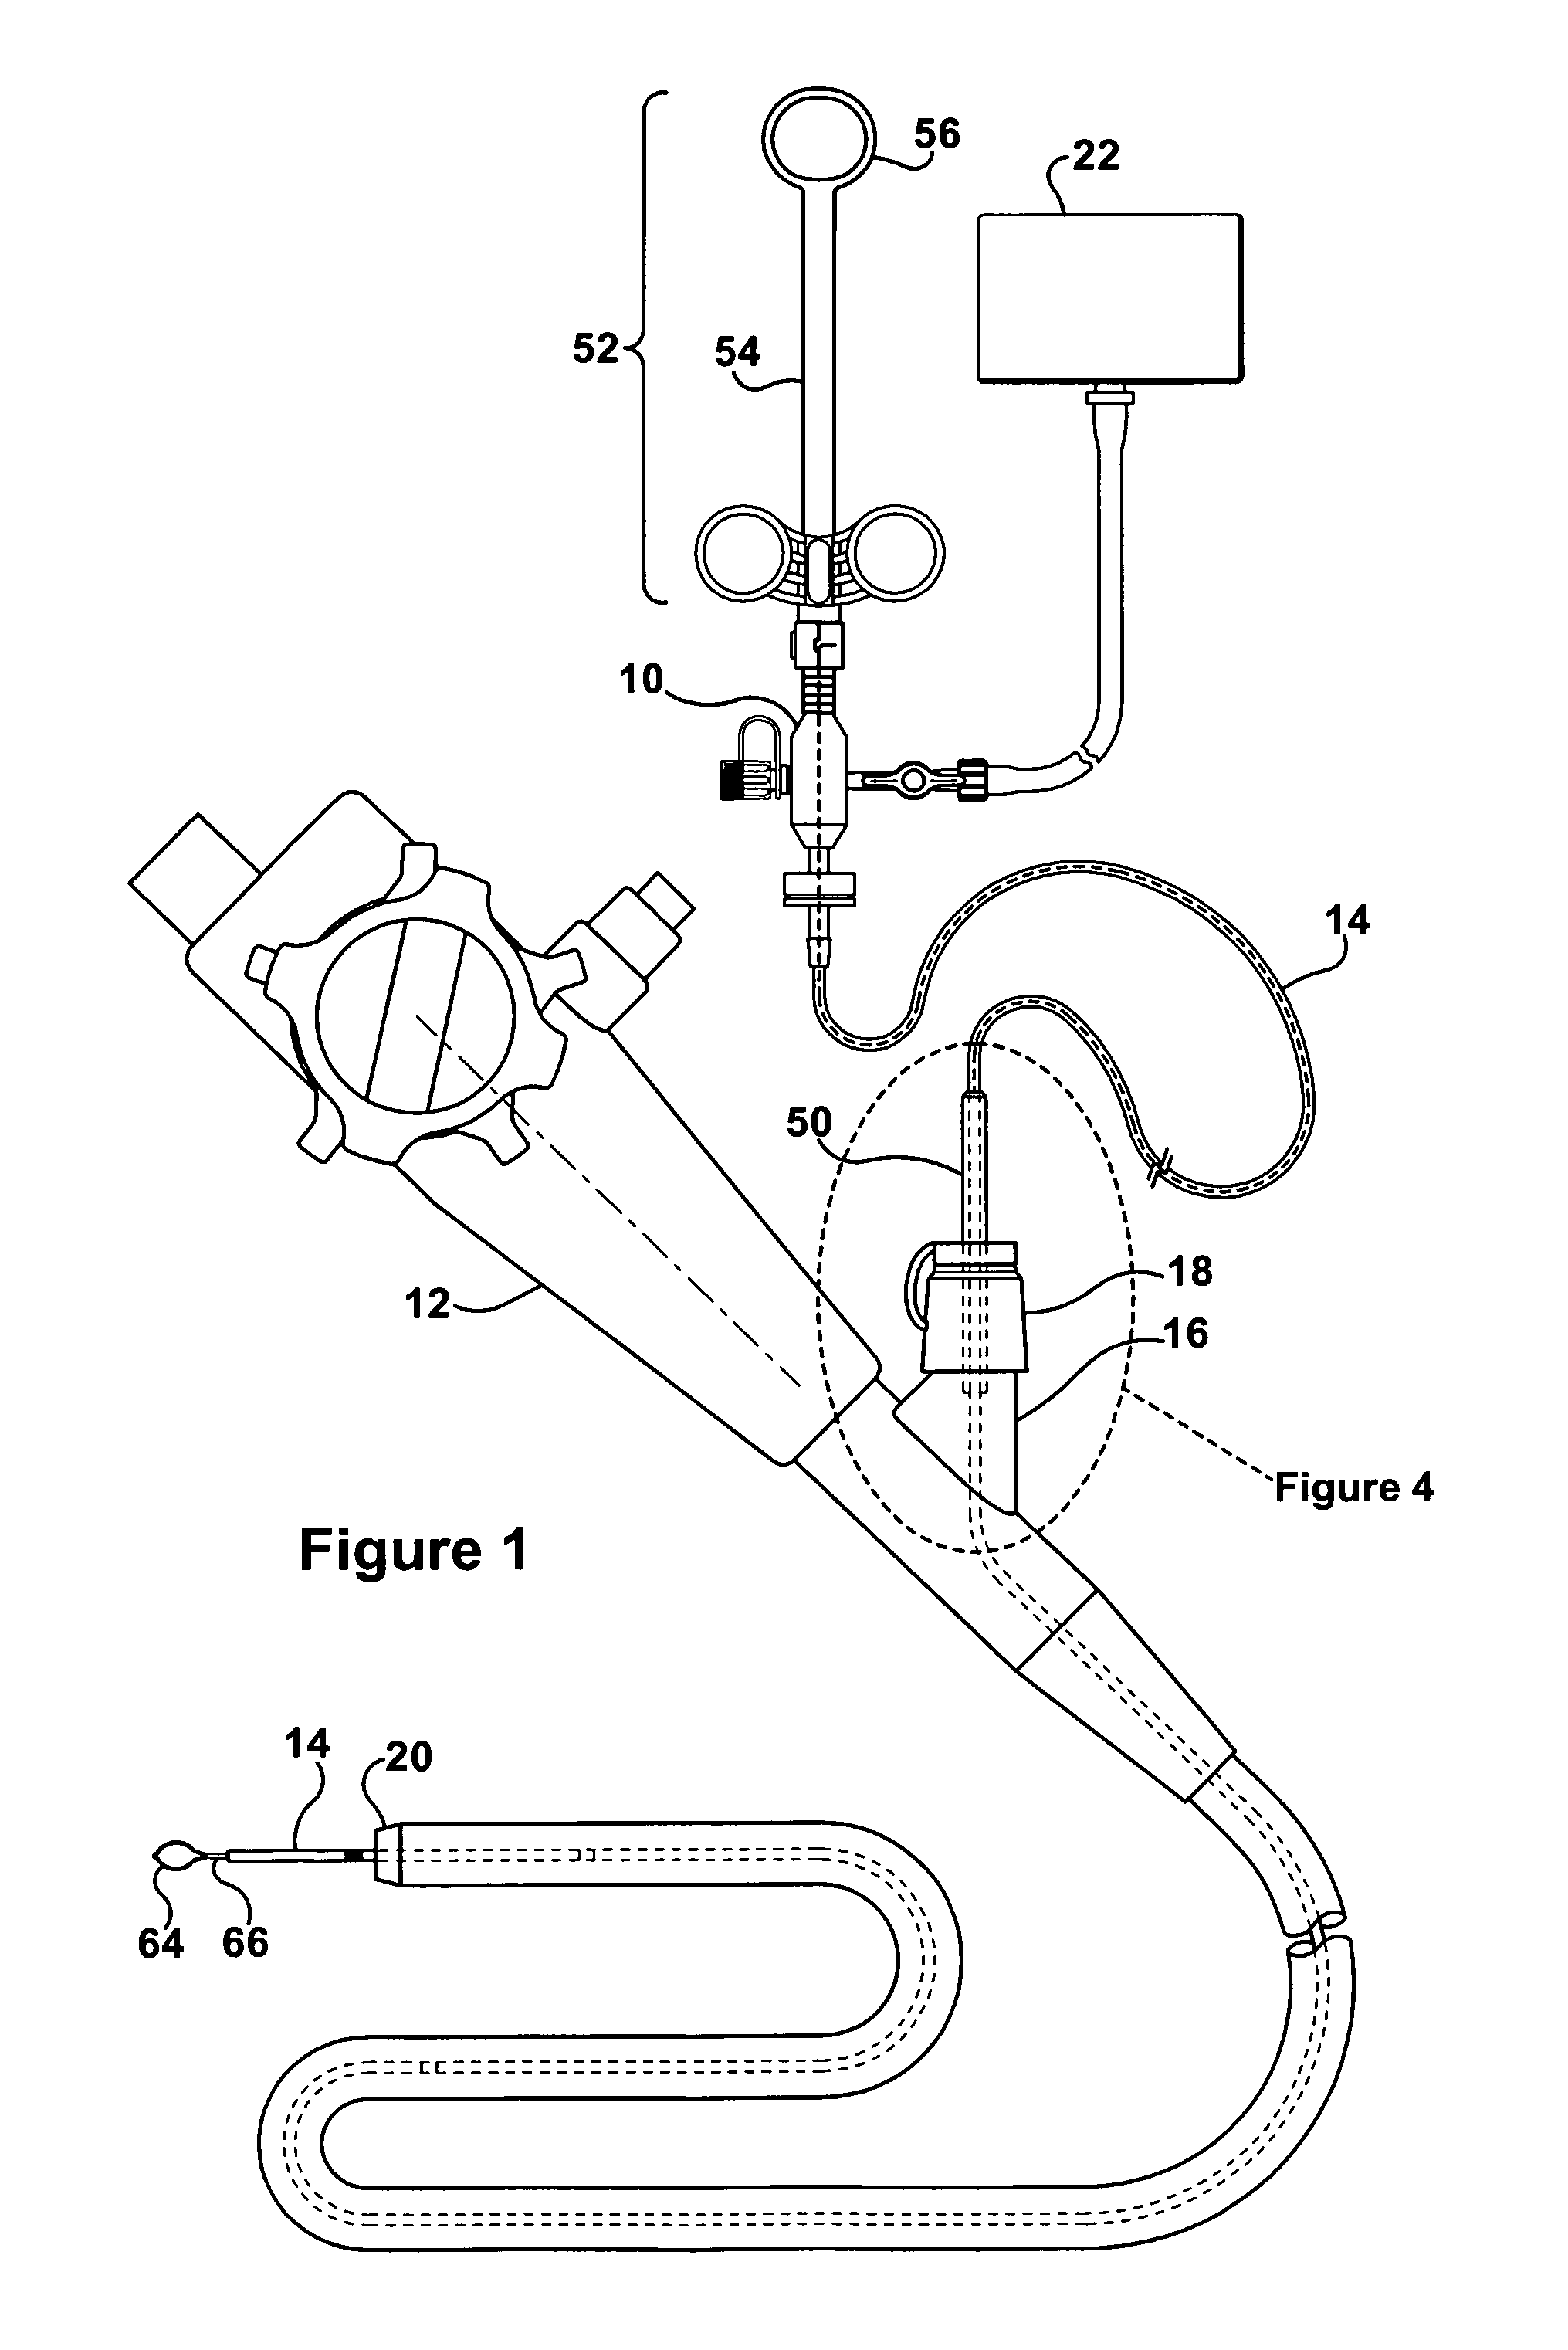 Polypectomy device and method of use